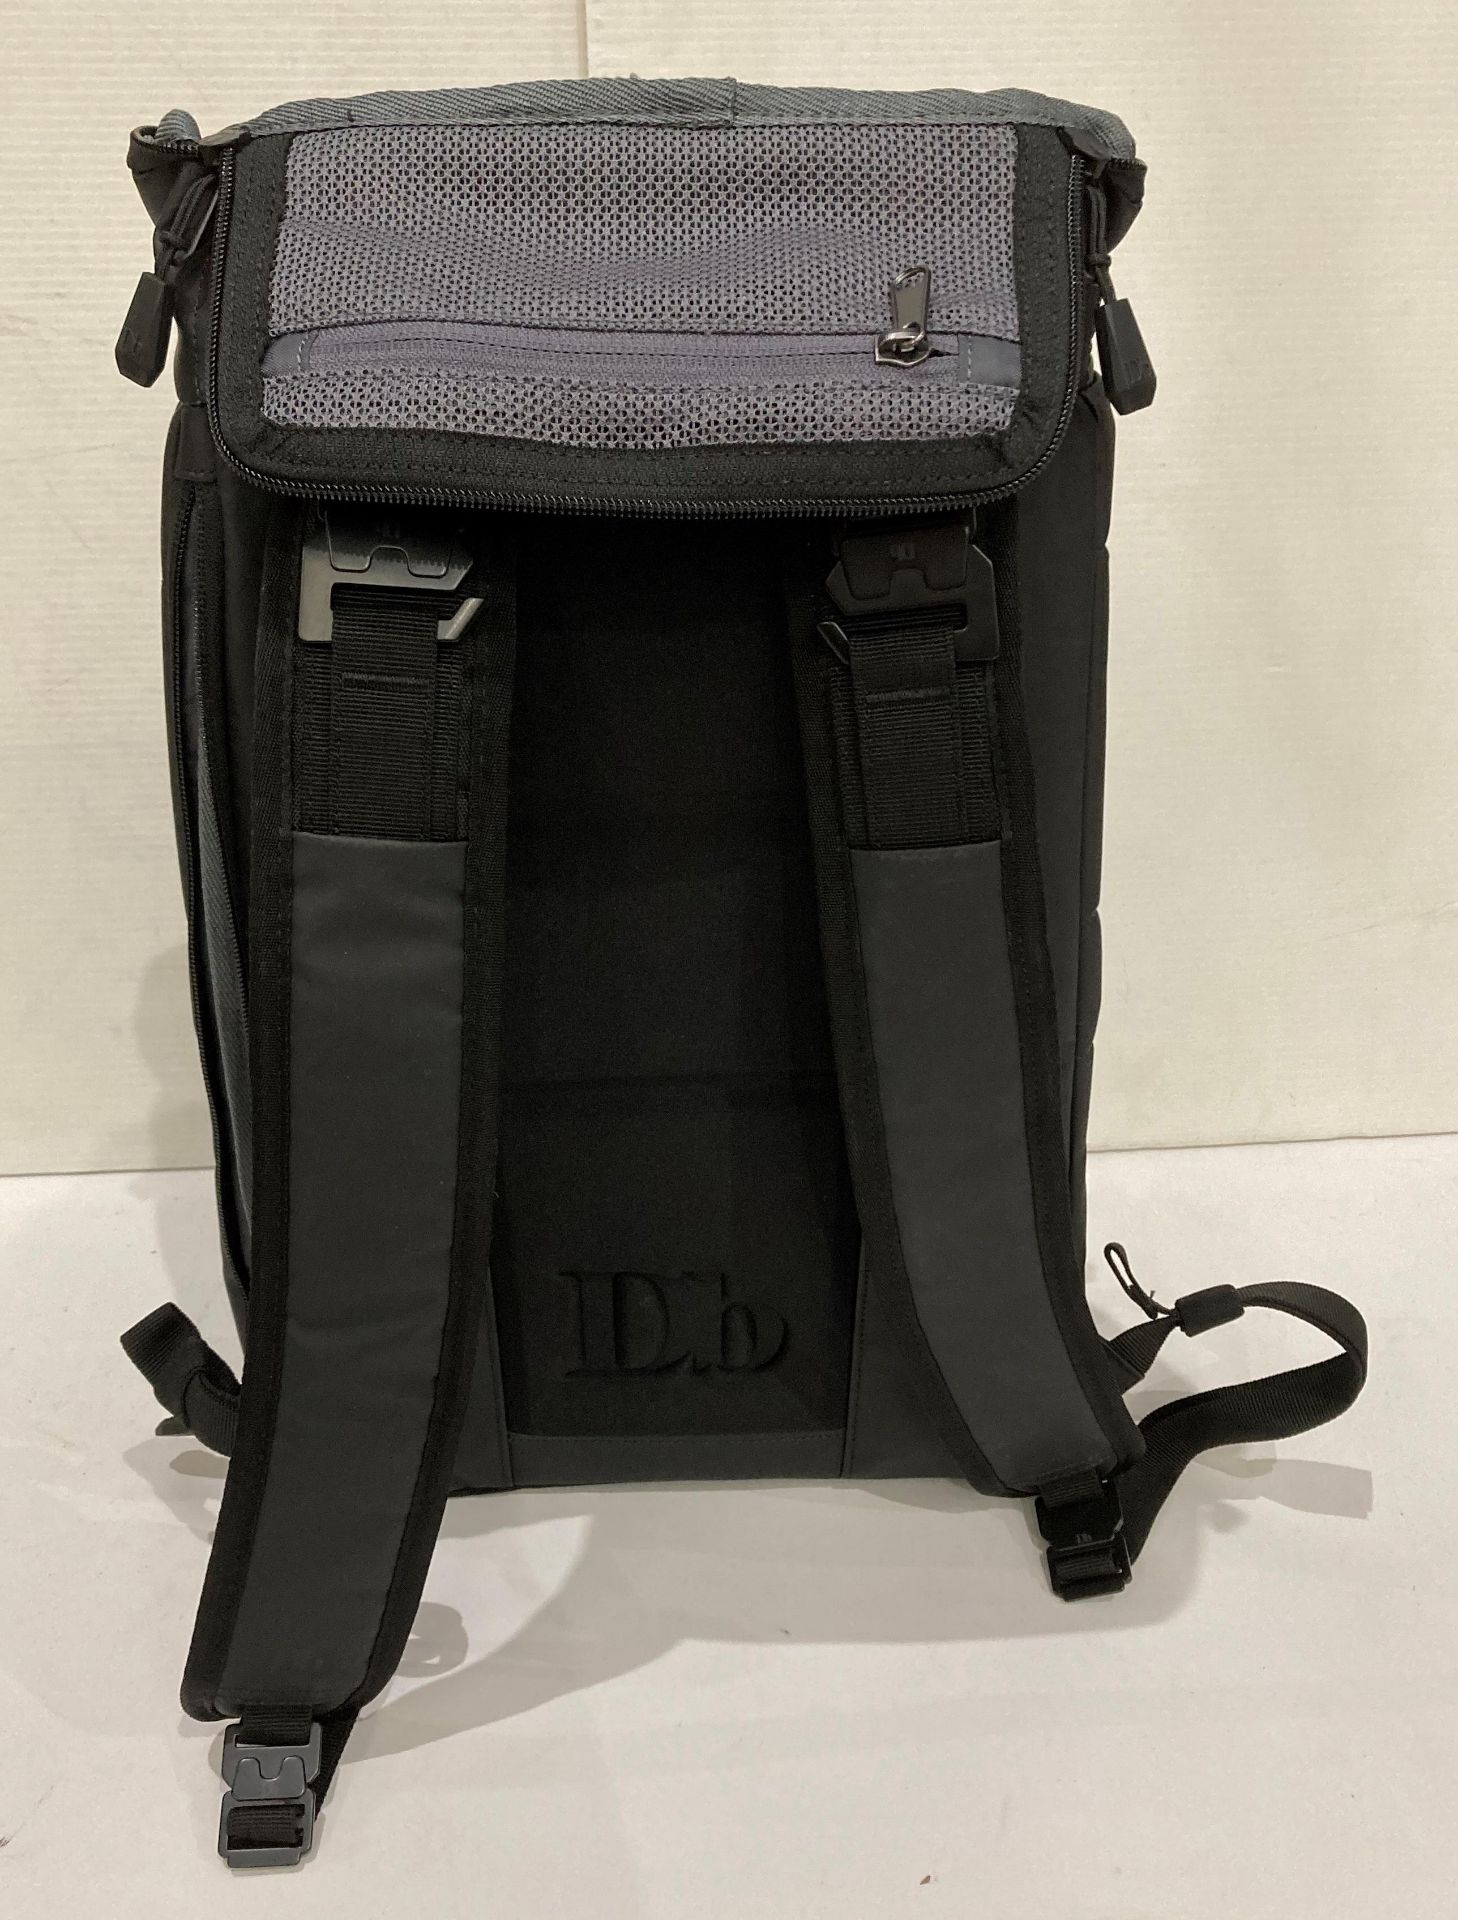 DB Hugger backpack 20L Black Out (RRP £169 with original tags) (saleroom location: S3 QC02) - Image 2 of 3